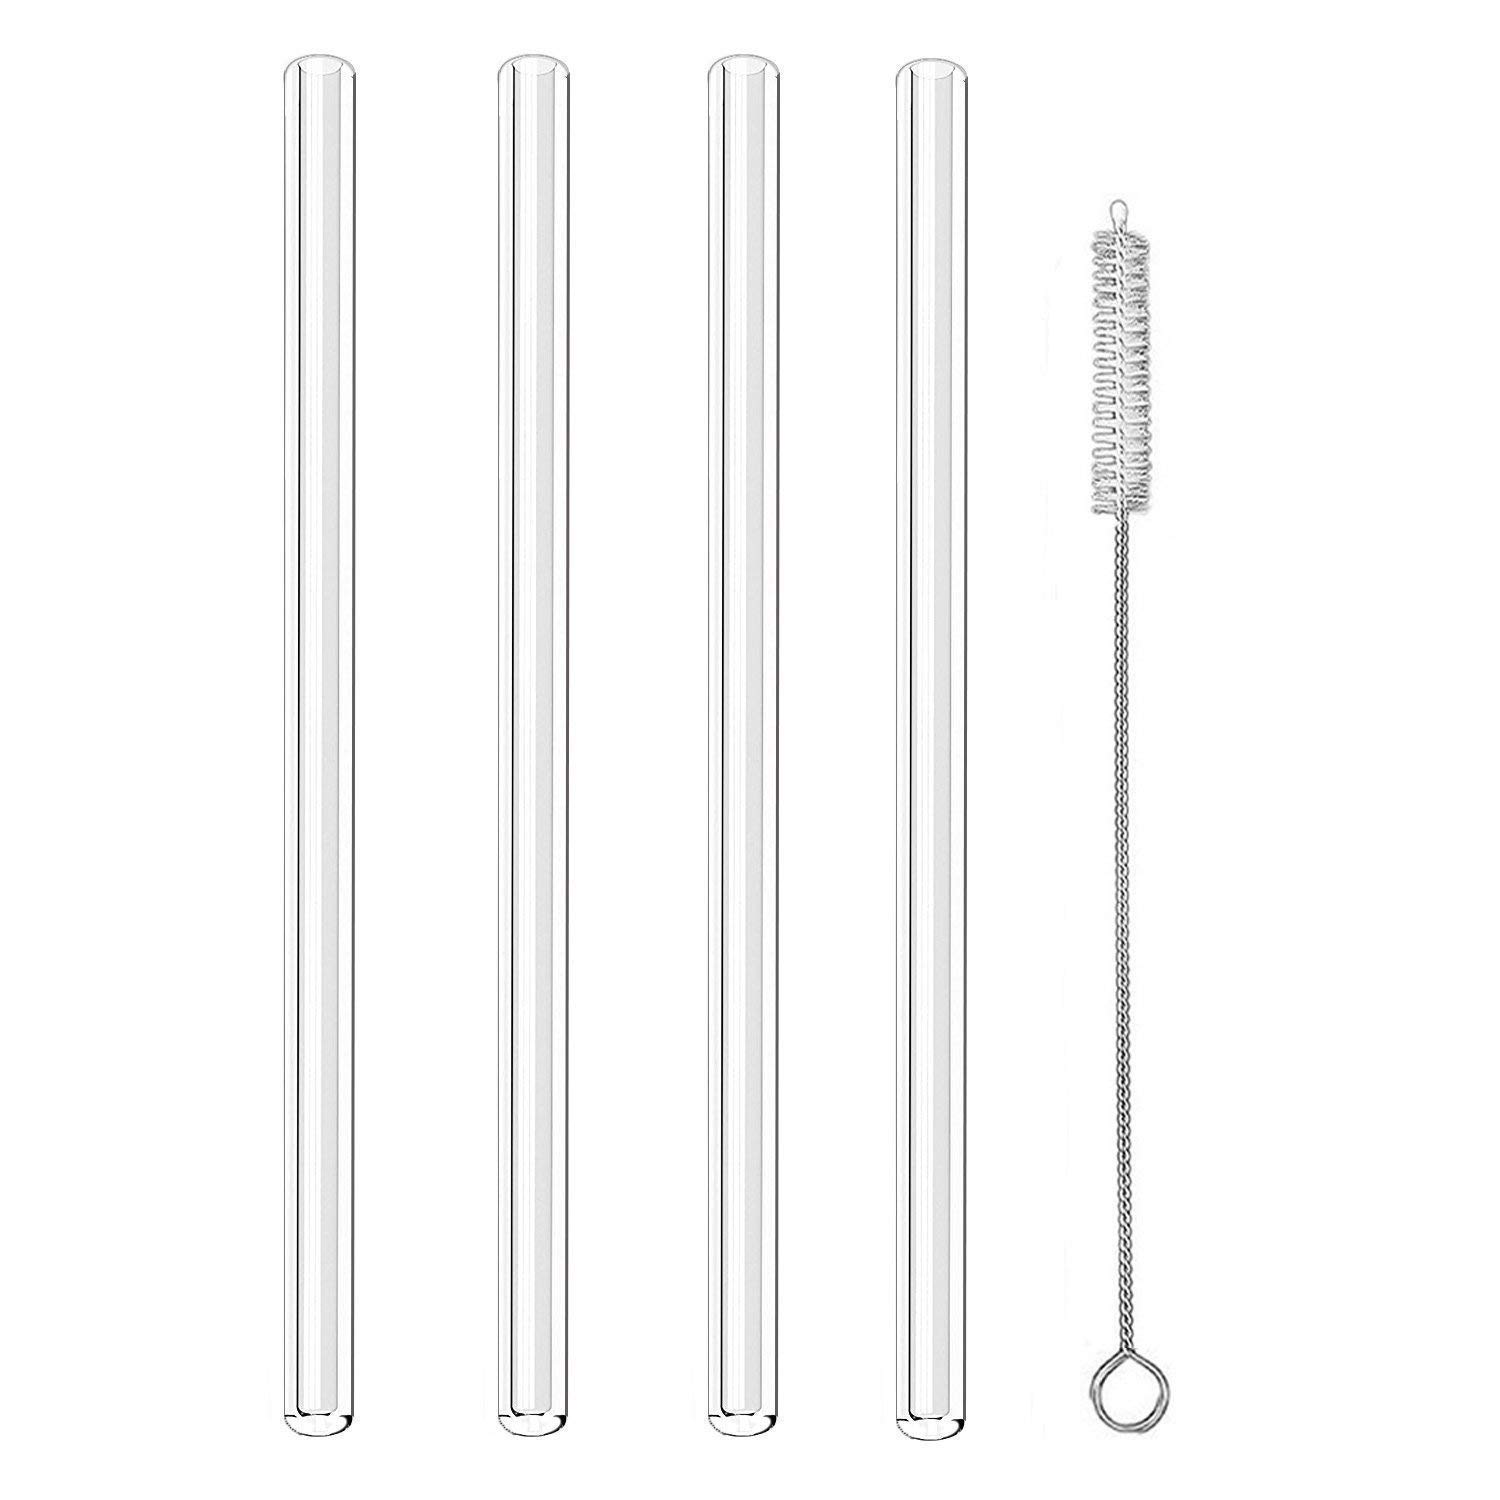 ALINK Clear Straight Glass Drinking Straws, 9" x 10 mm Reusable Smoothie Straws, Set of 4 with Cleaning Brush